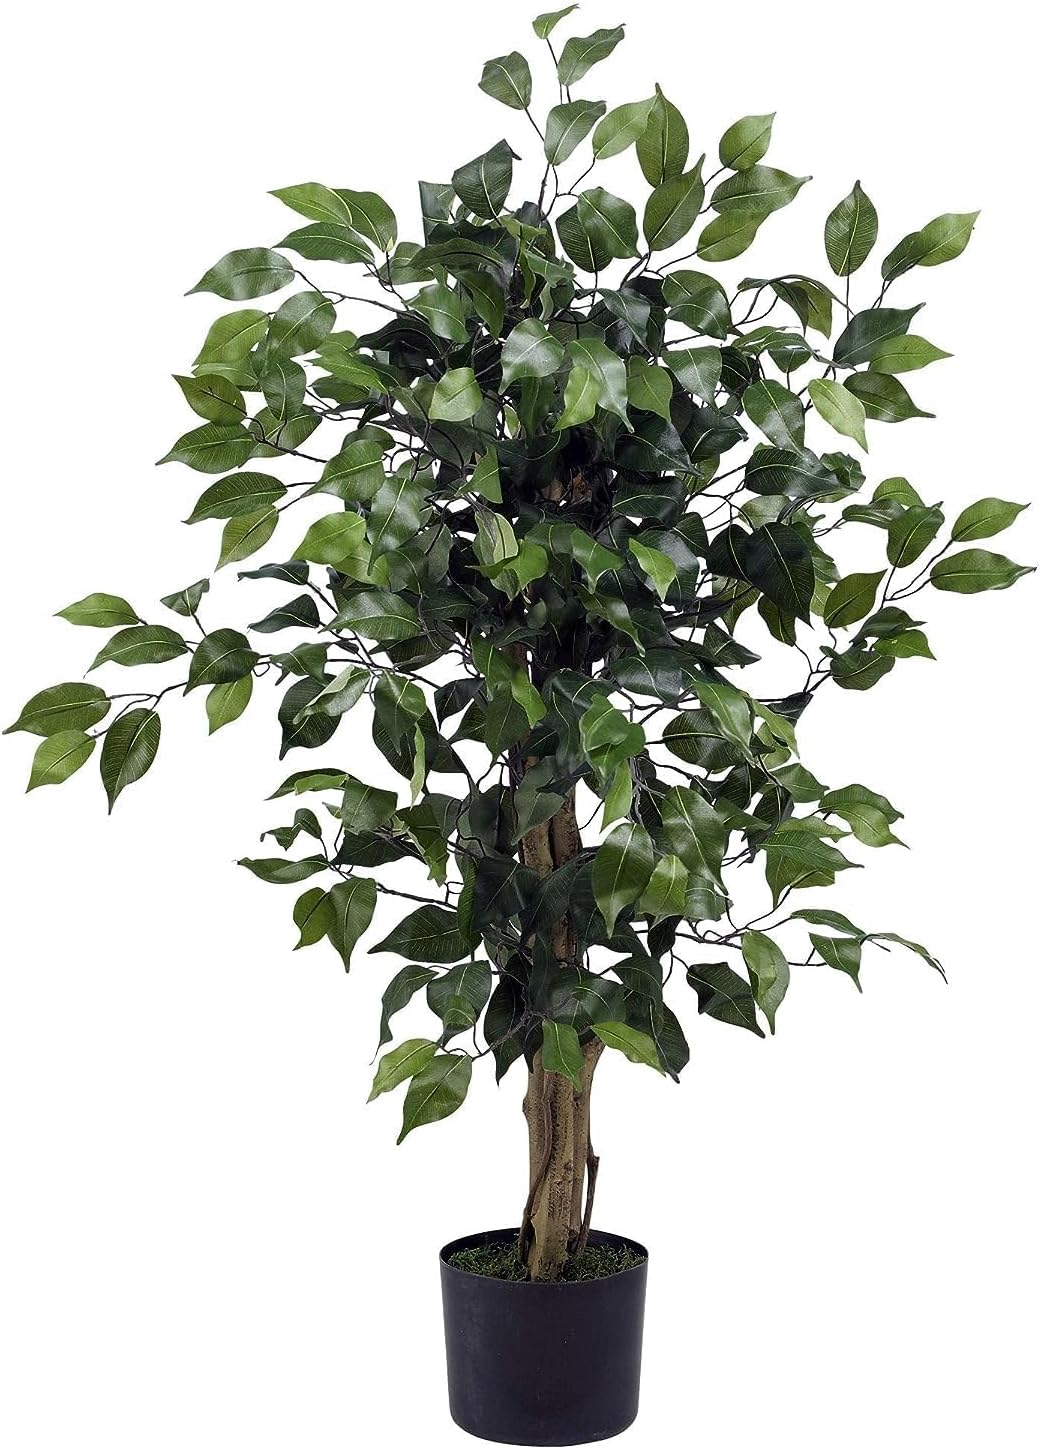 The tree is perfect. Fast shipping. Sturdy packing. Very easy to adjust the branches to make the tree full. None of the leaves broke or fell off. I'm 6'0 and it' definitely as tall as me. Some faux plants don't look real - this one looks fantastic!